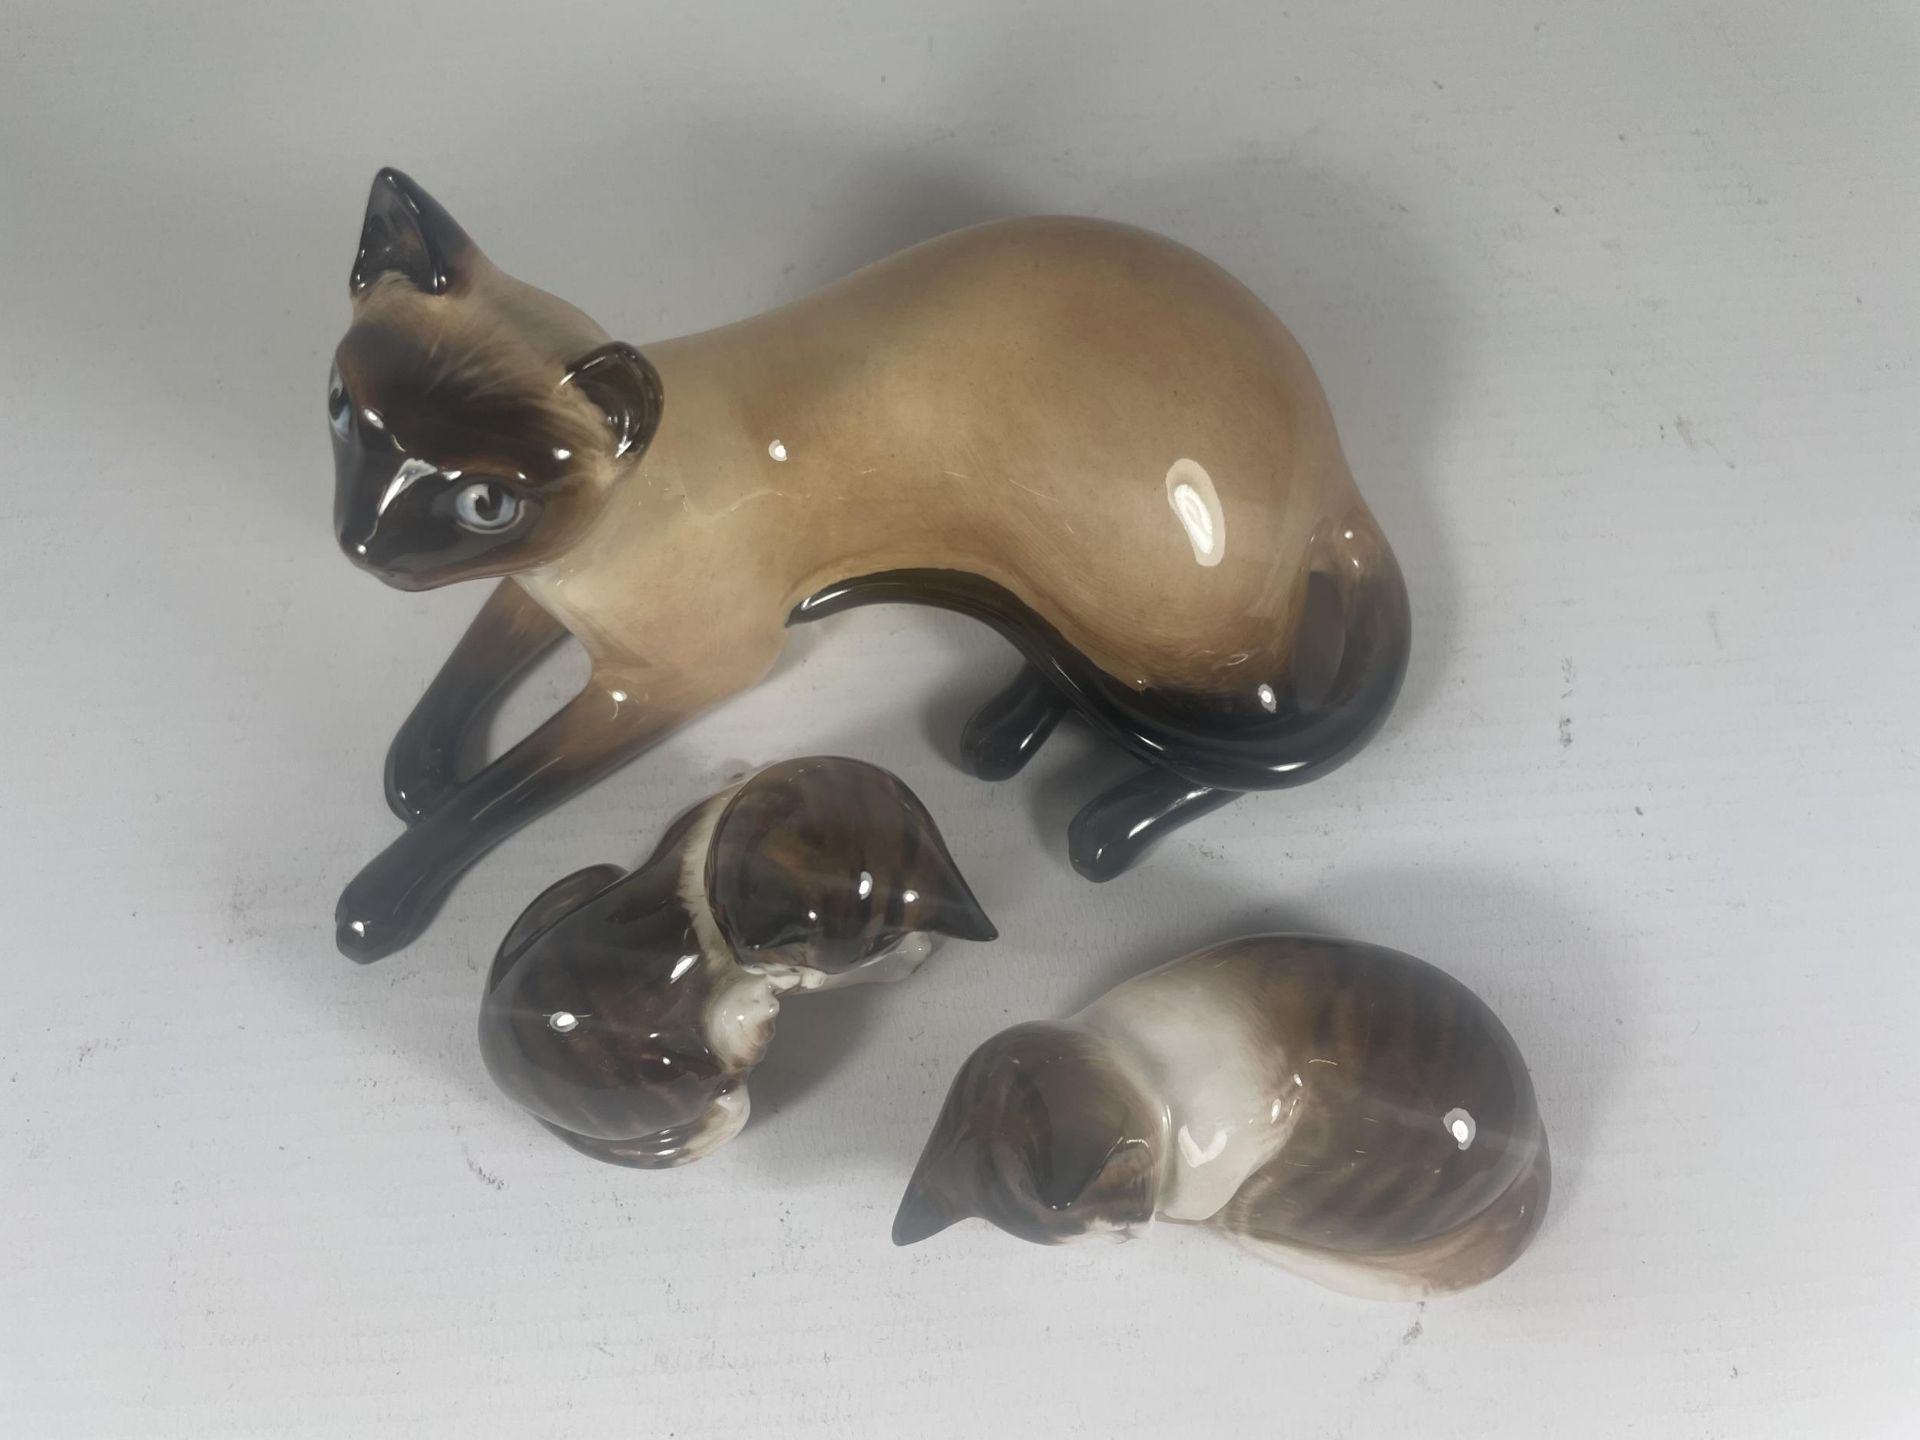 THREE ROYAL DOULTON CATS TO INCLUDE SIAMESE HN2662 (SECONDS) - Image 2 of 6